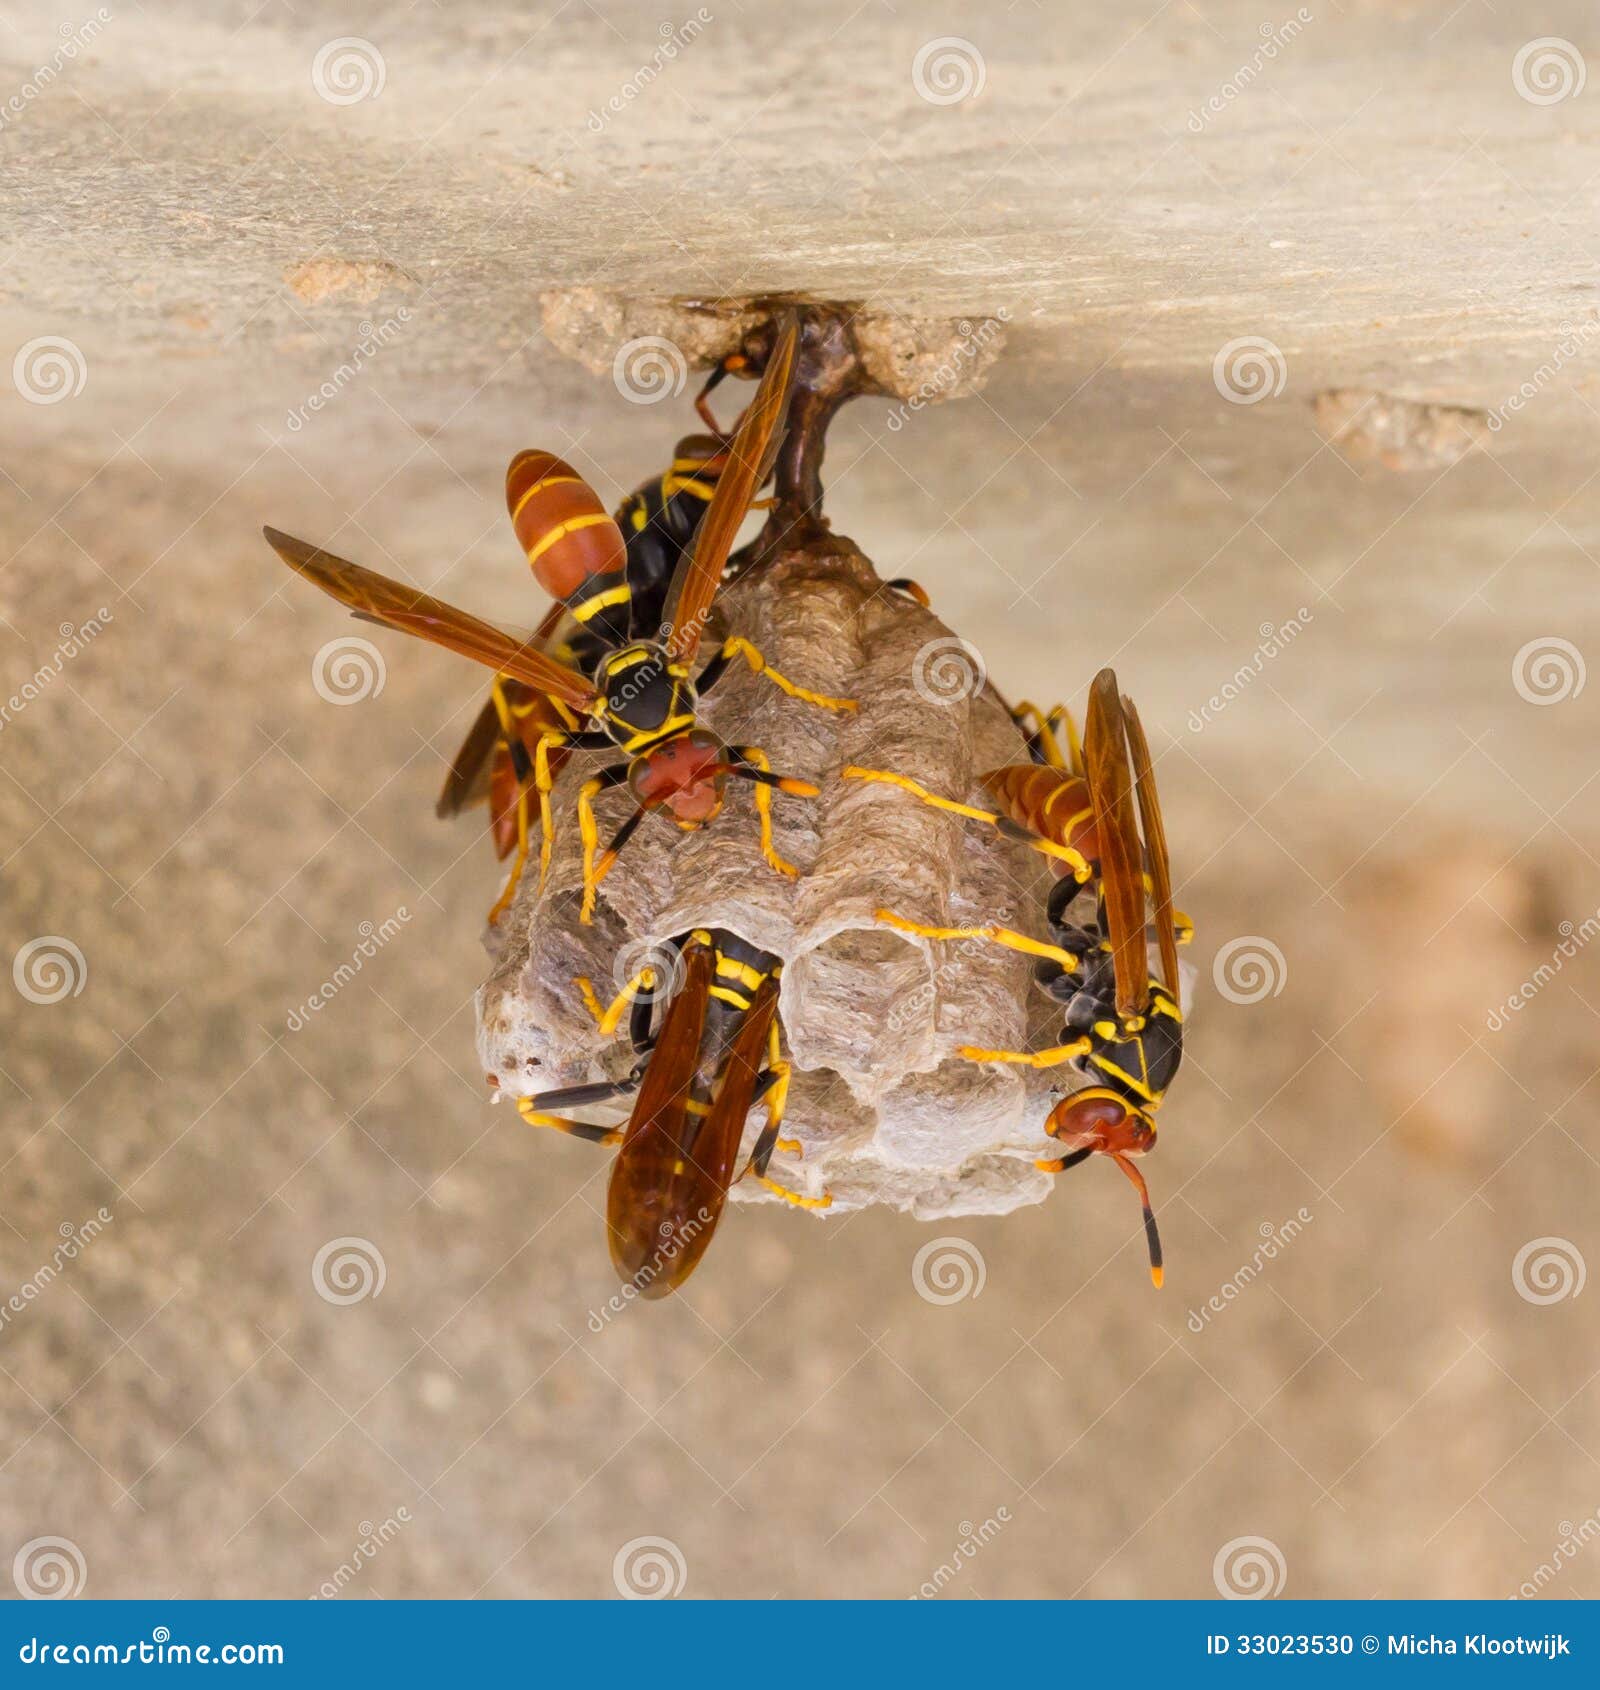 jack spaniard wasps on a small nest